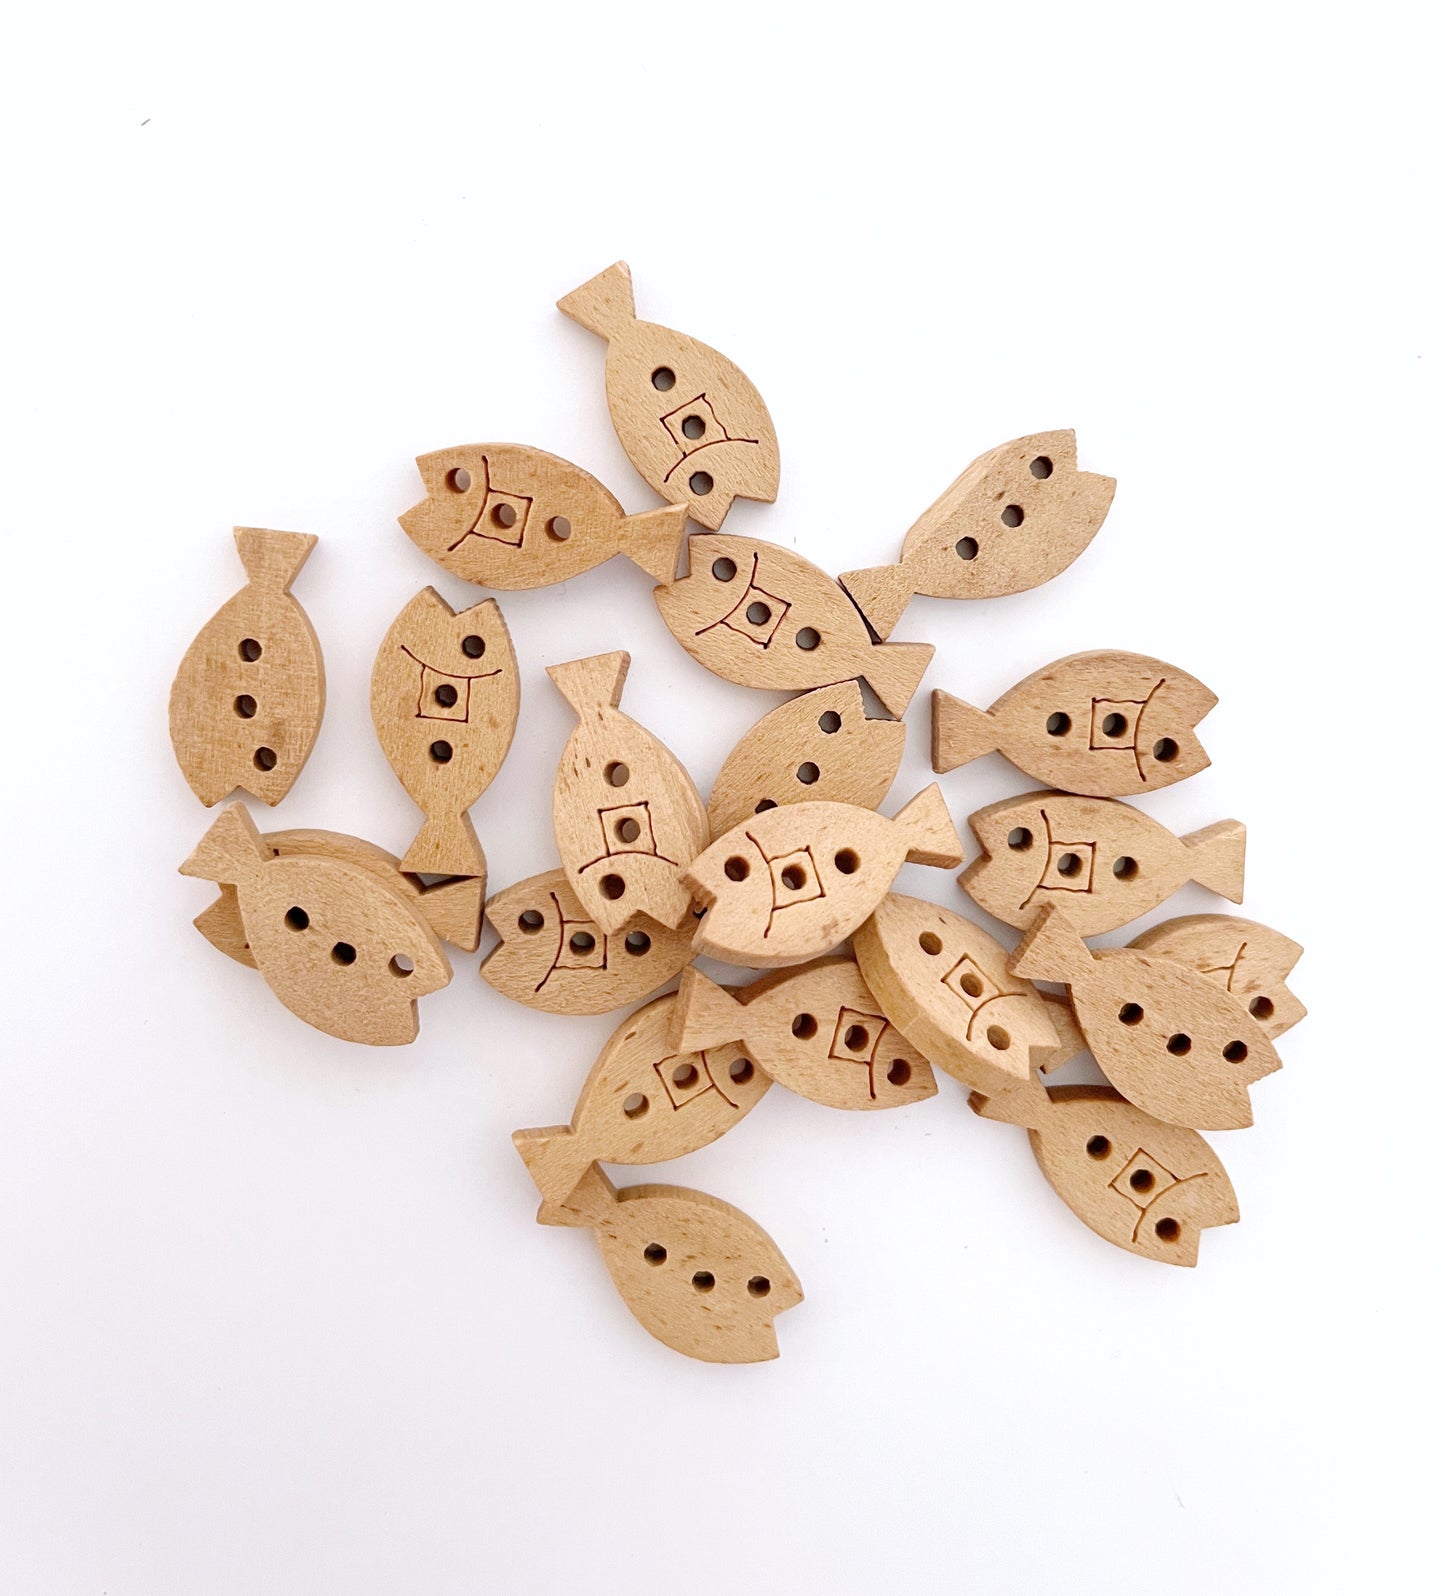 Fancy Wooden buttons - pack of 6 - DWB07